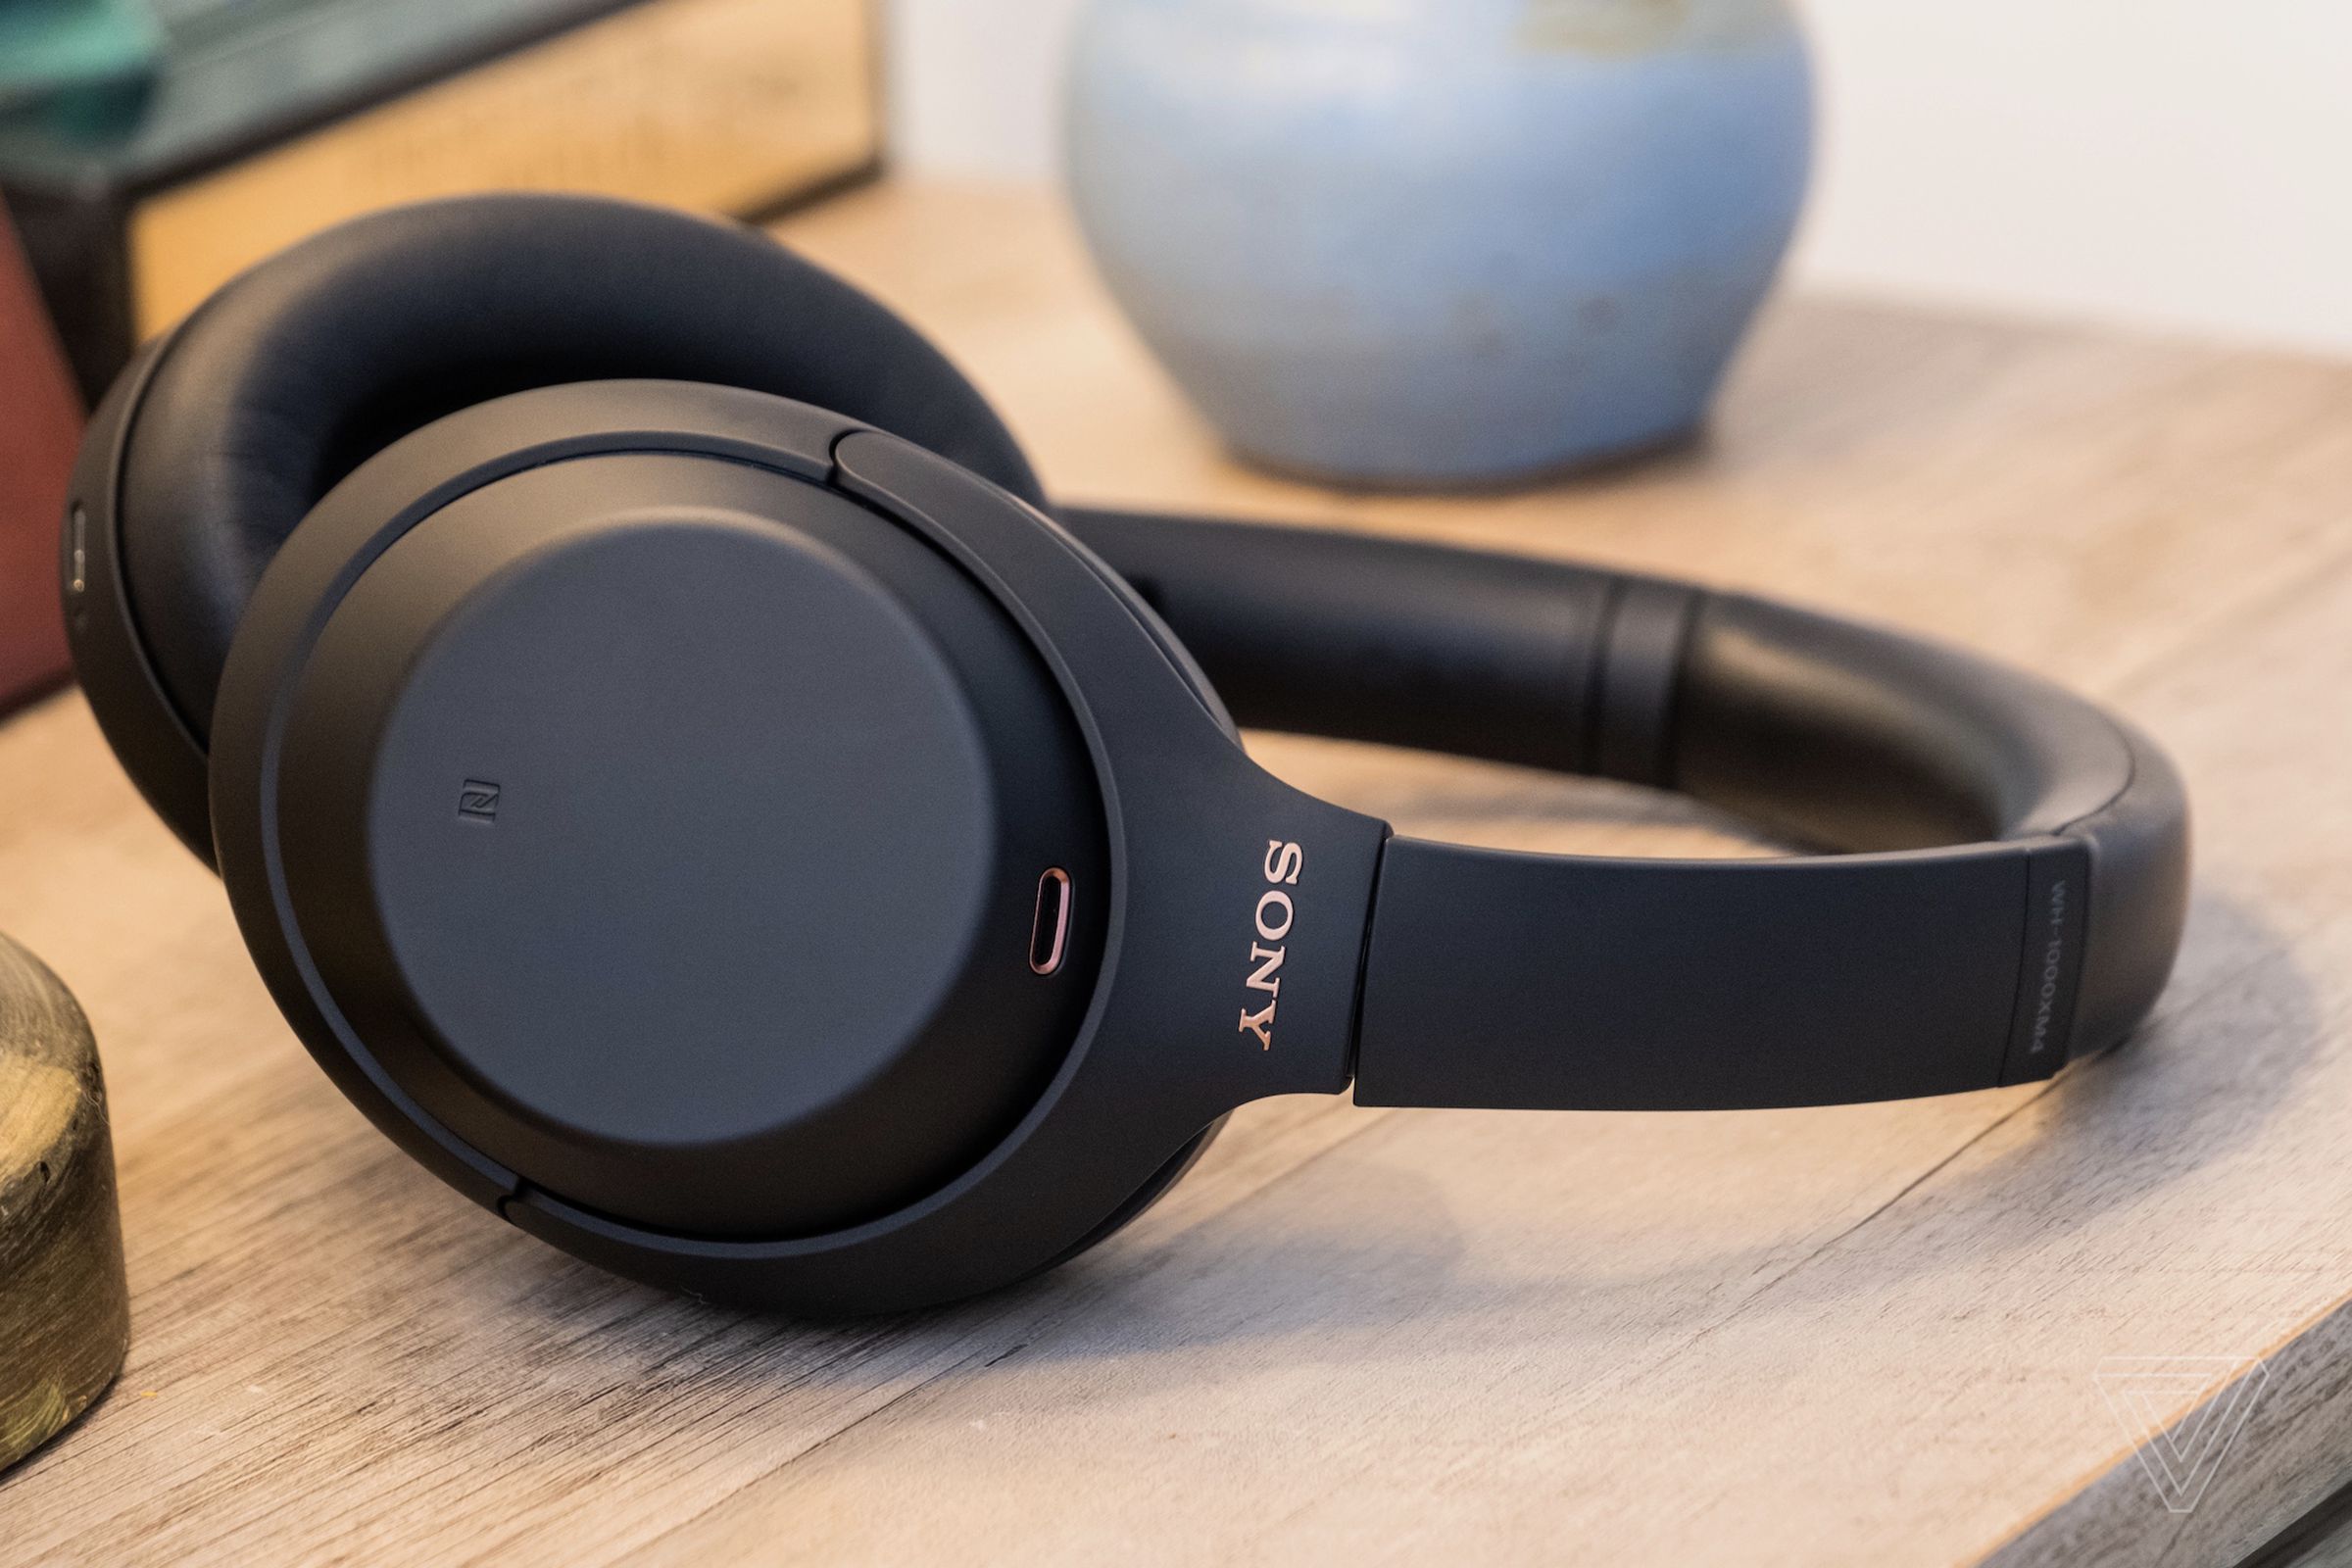 A photo of Sony’s WH-1000XM4, the best noise-canceling headphones for most people, resting on a table.